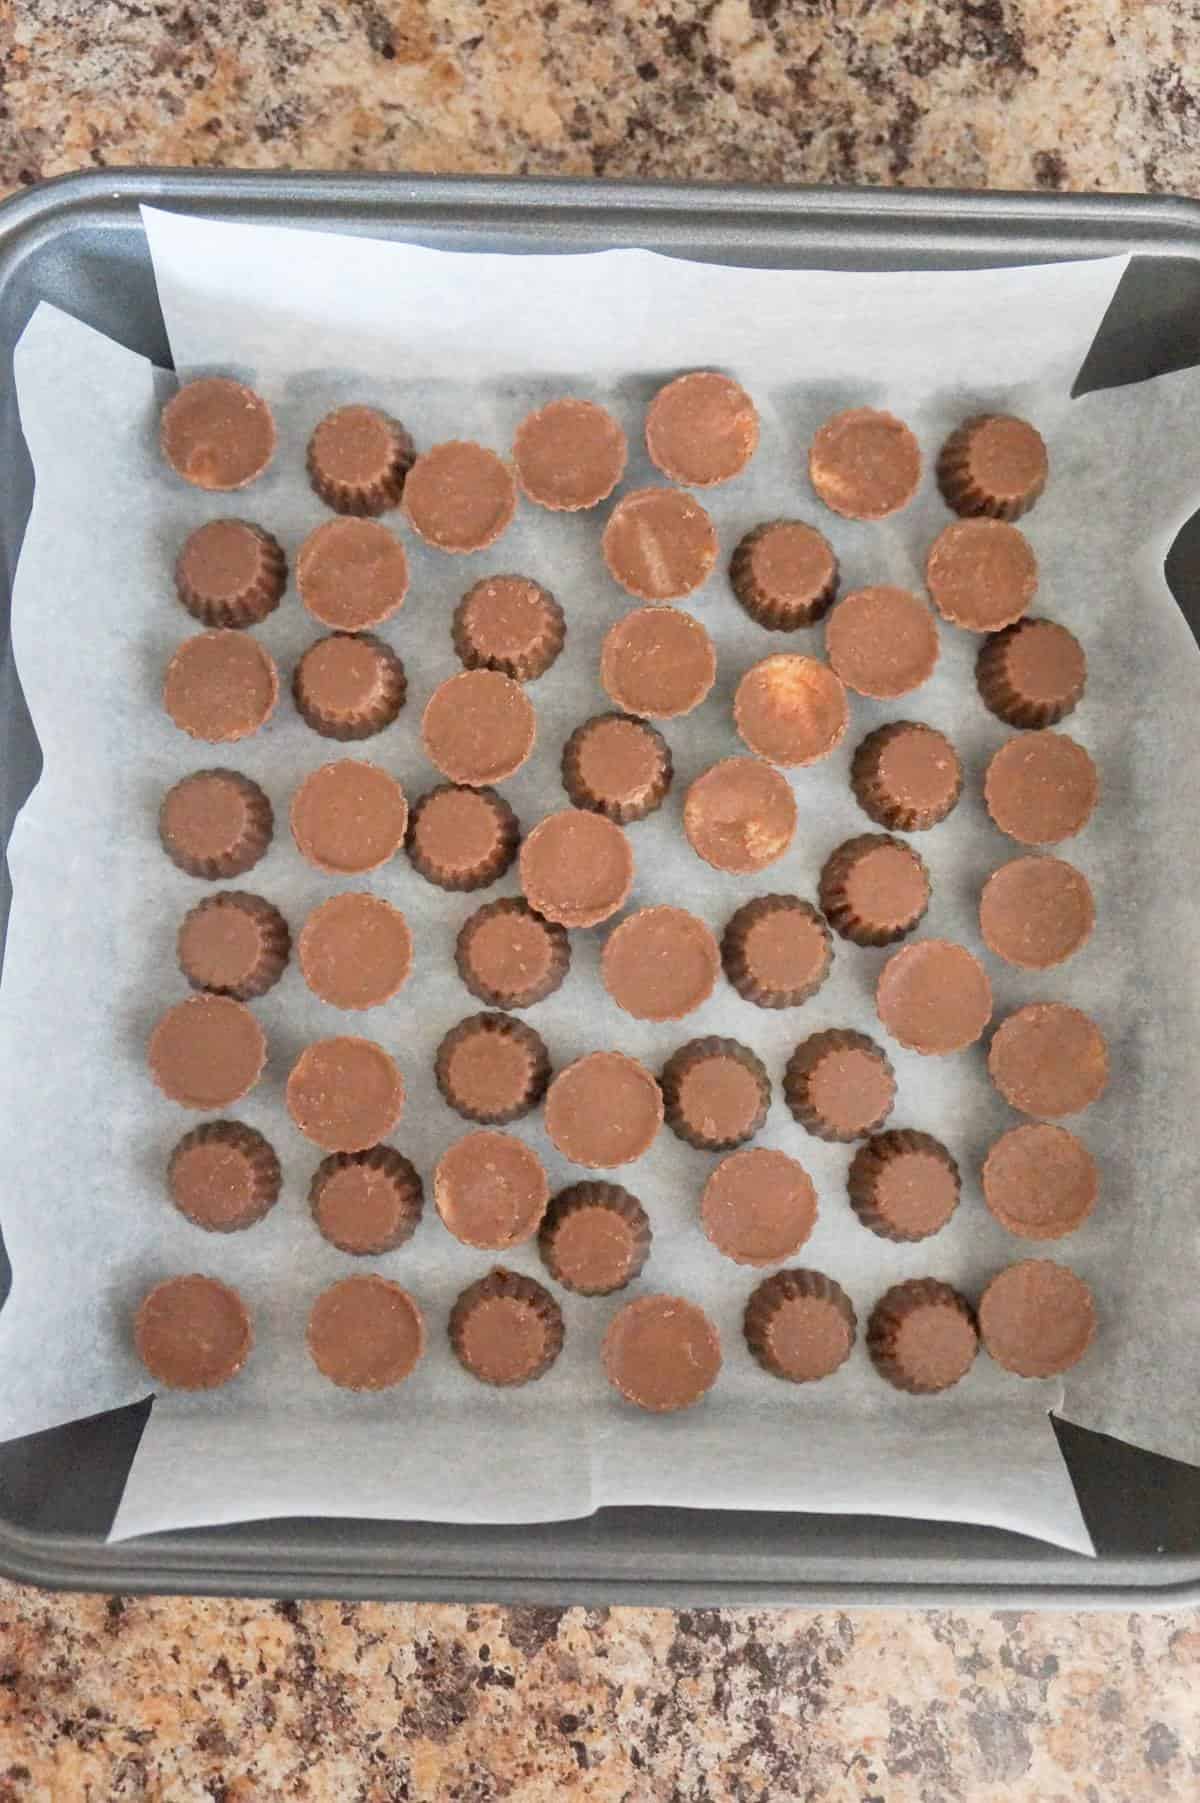 Reese's minis peanut butter cups in a single layer in a parchment paper lined baking pan